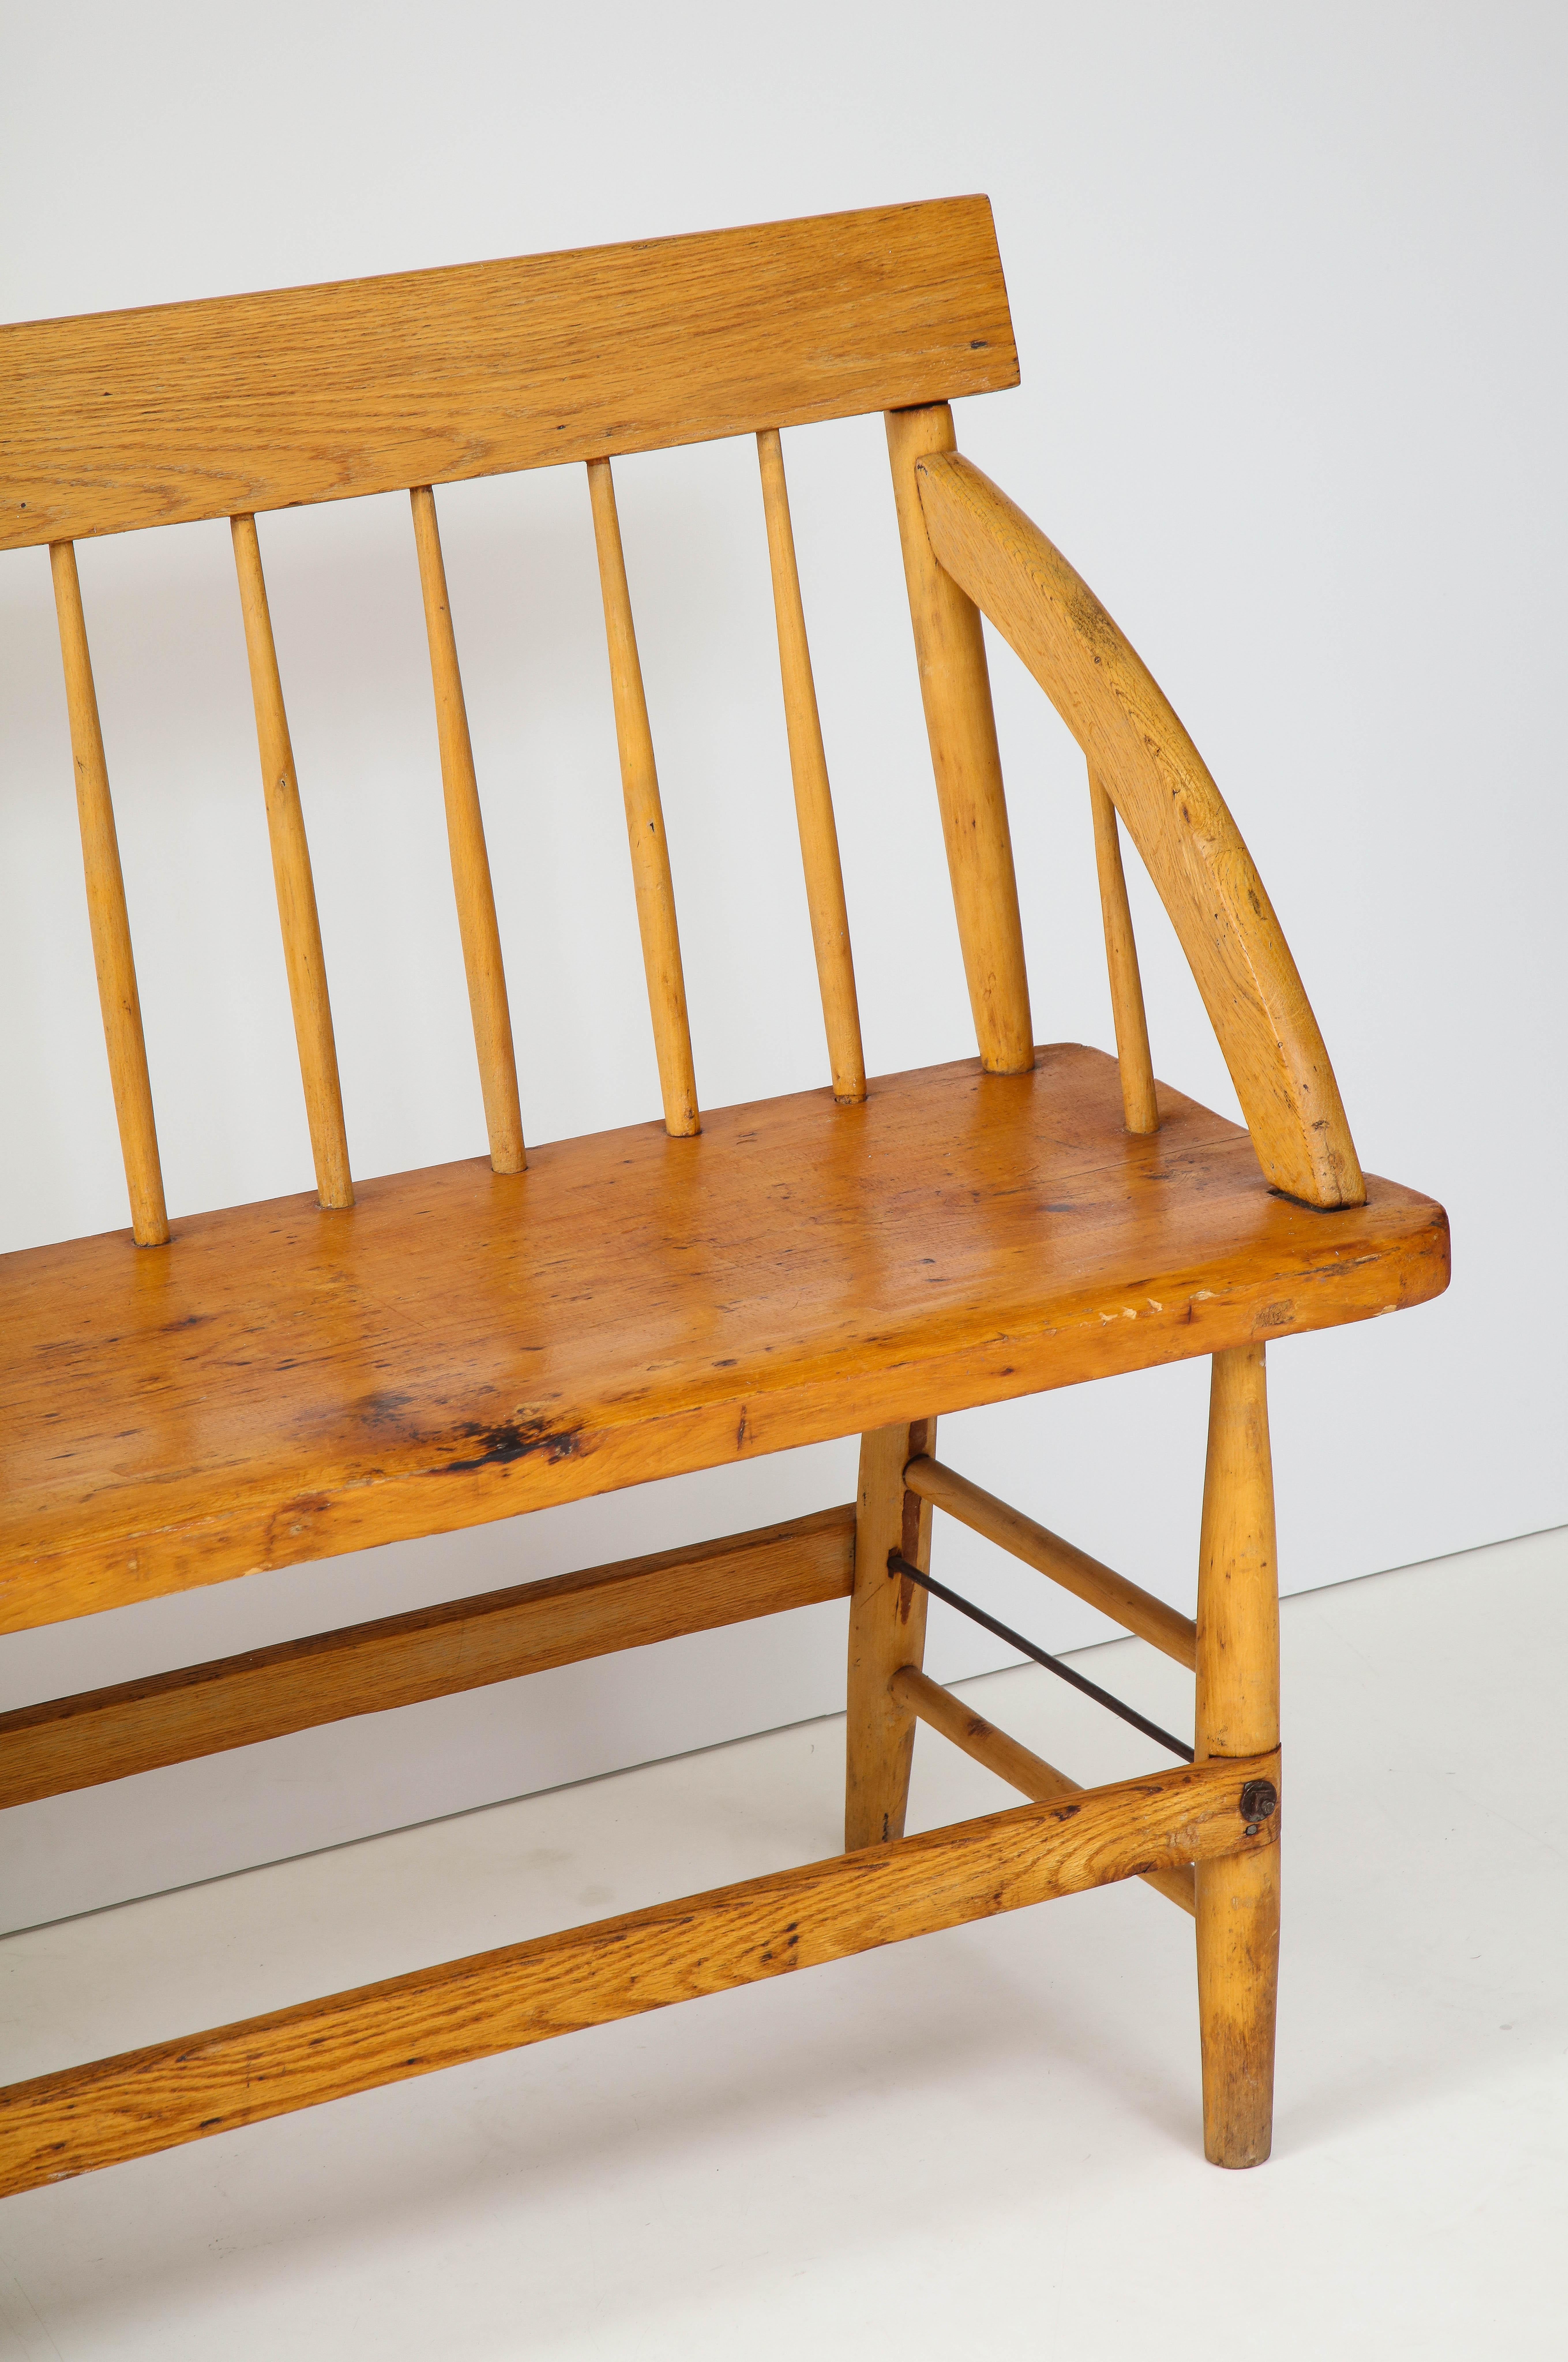 Hand-Carved Exceptional 19th C. Hand Made Quaker Meeting House Bench, New England/Cape Cod